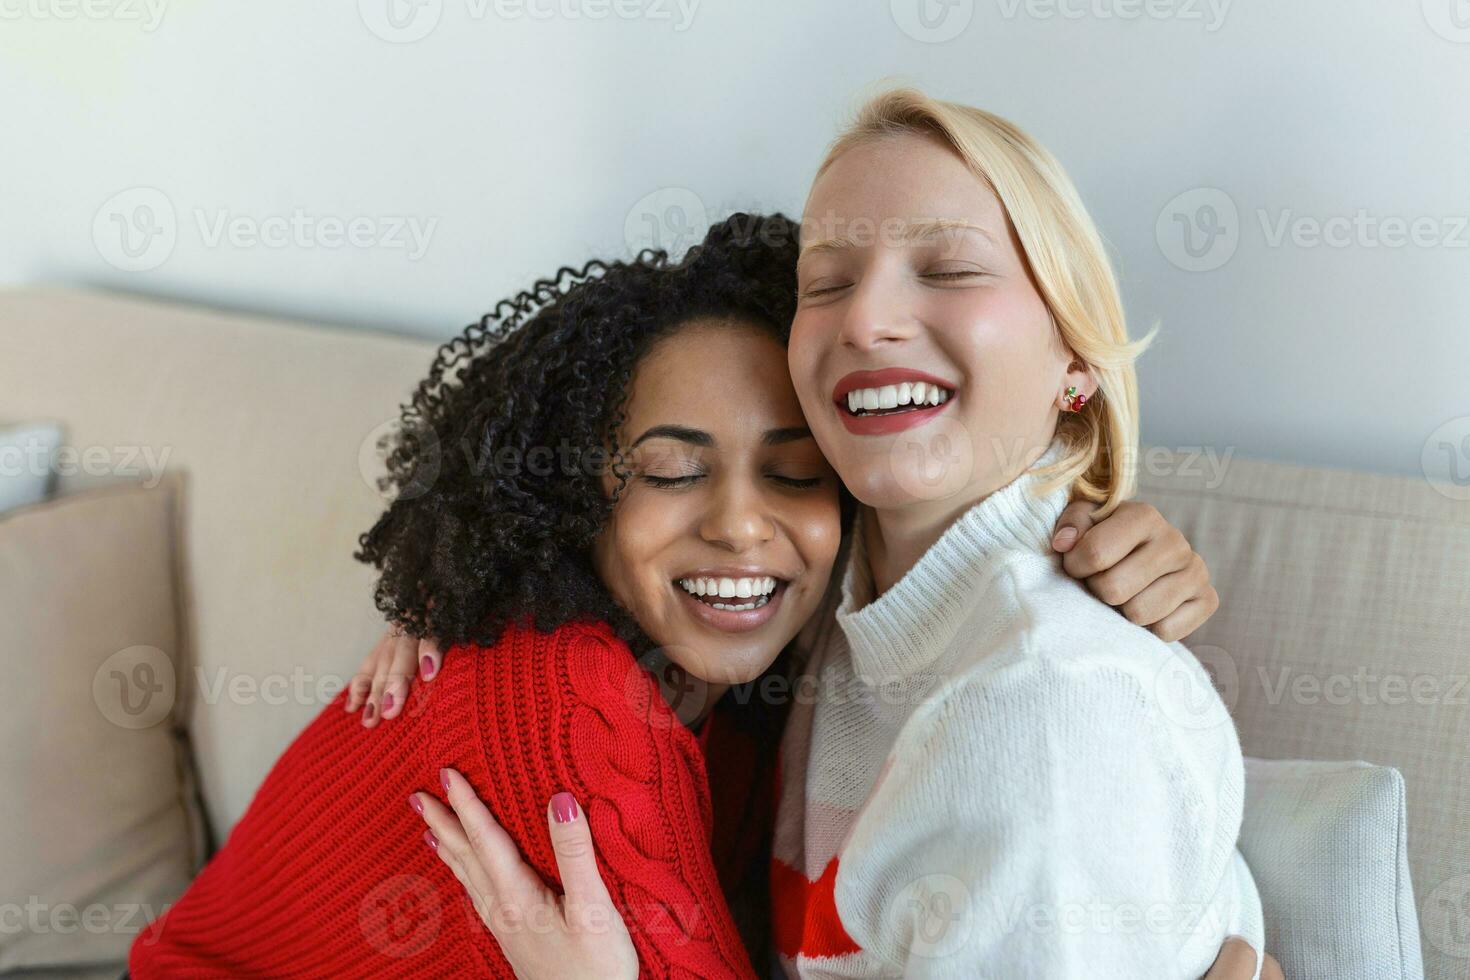 Candid diverse girls best friends embracing standing indoors, close up satisfied women face enjoy tender moment missed glad to see each other after long separation, friendship warm relations concept photo